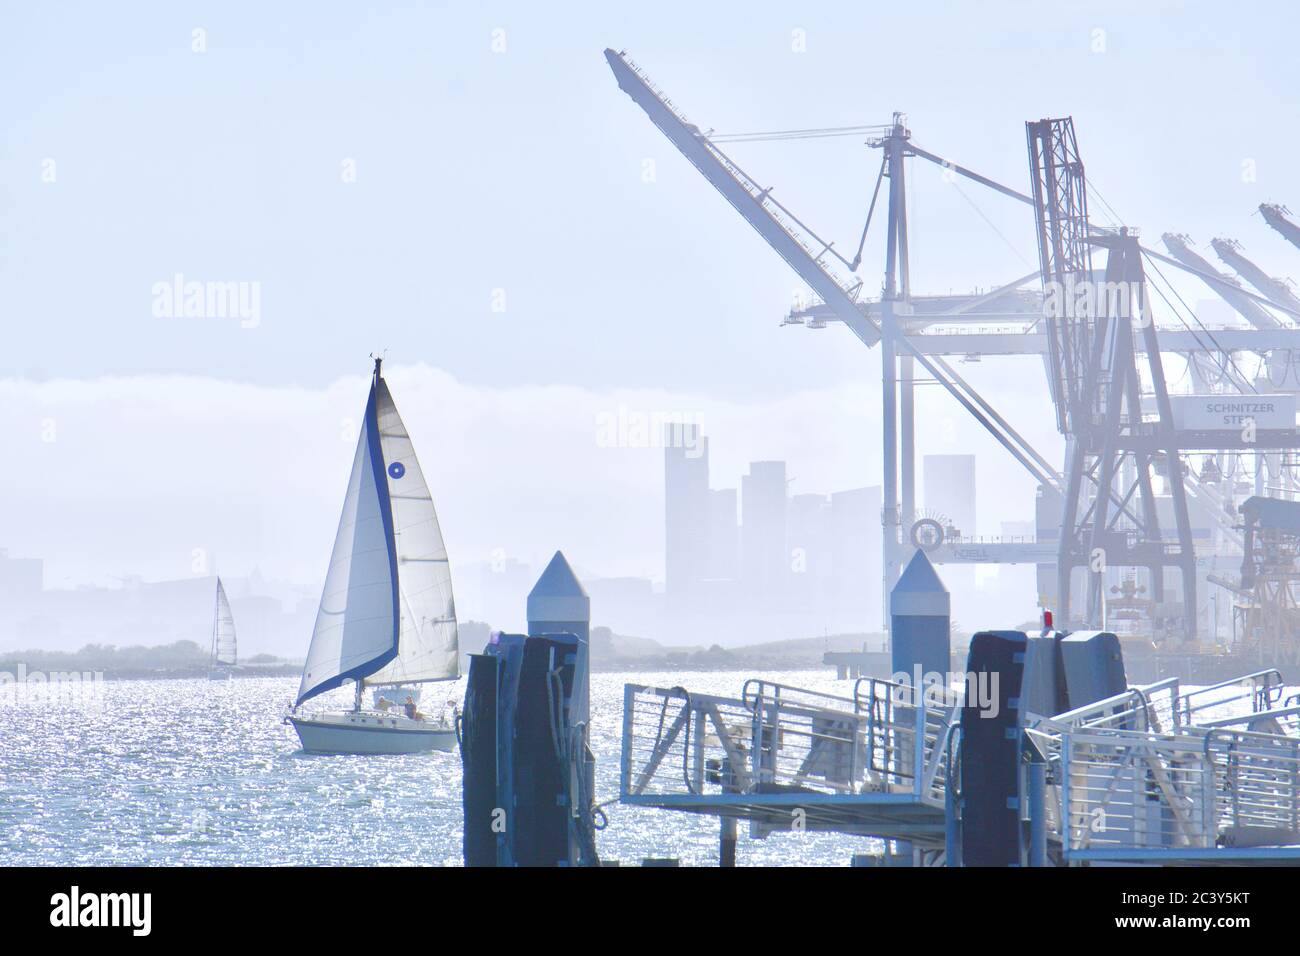 Sailboat entering Oakland Inner Harbor, at Jack London Square, with shipping cranes and docks. Bay Area tourism and recreation. Oakland, CA, USA. Stock Photo